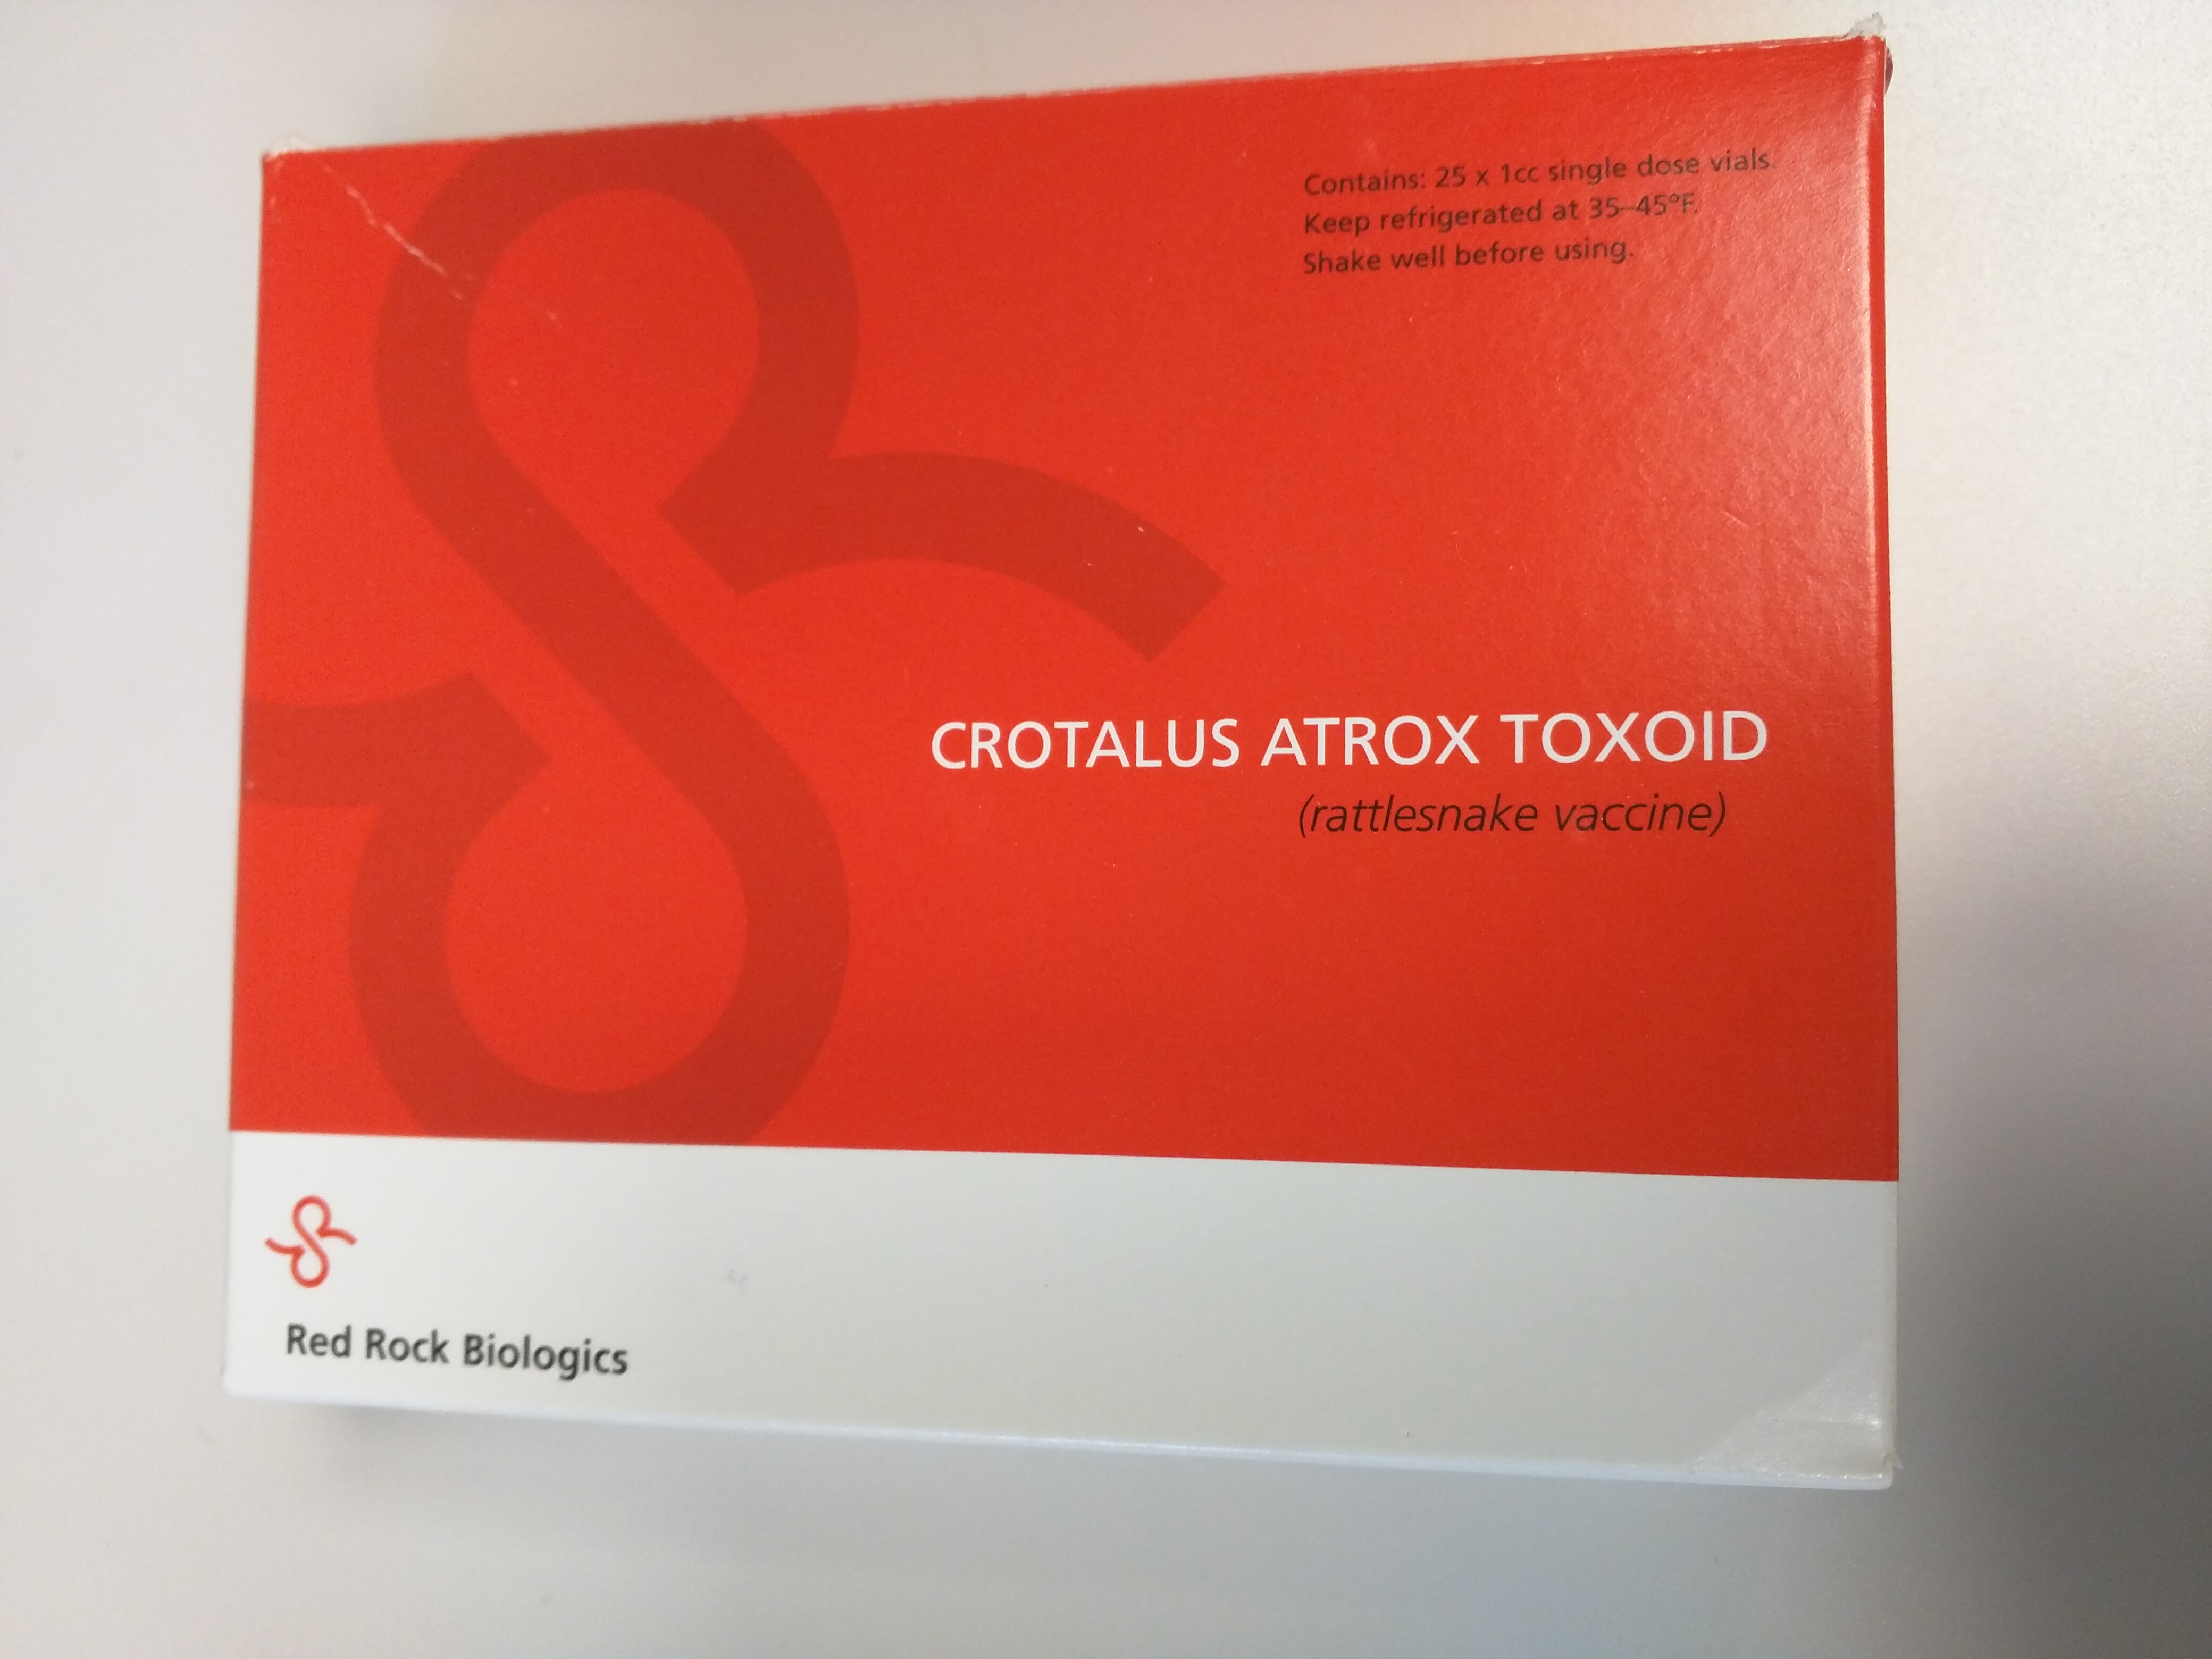 A box of Crotalus Atrox Toxoid (rattlesnake vaccine)